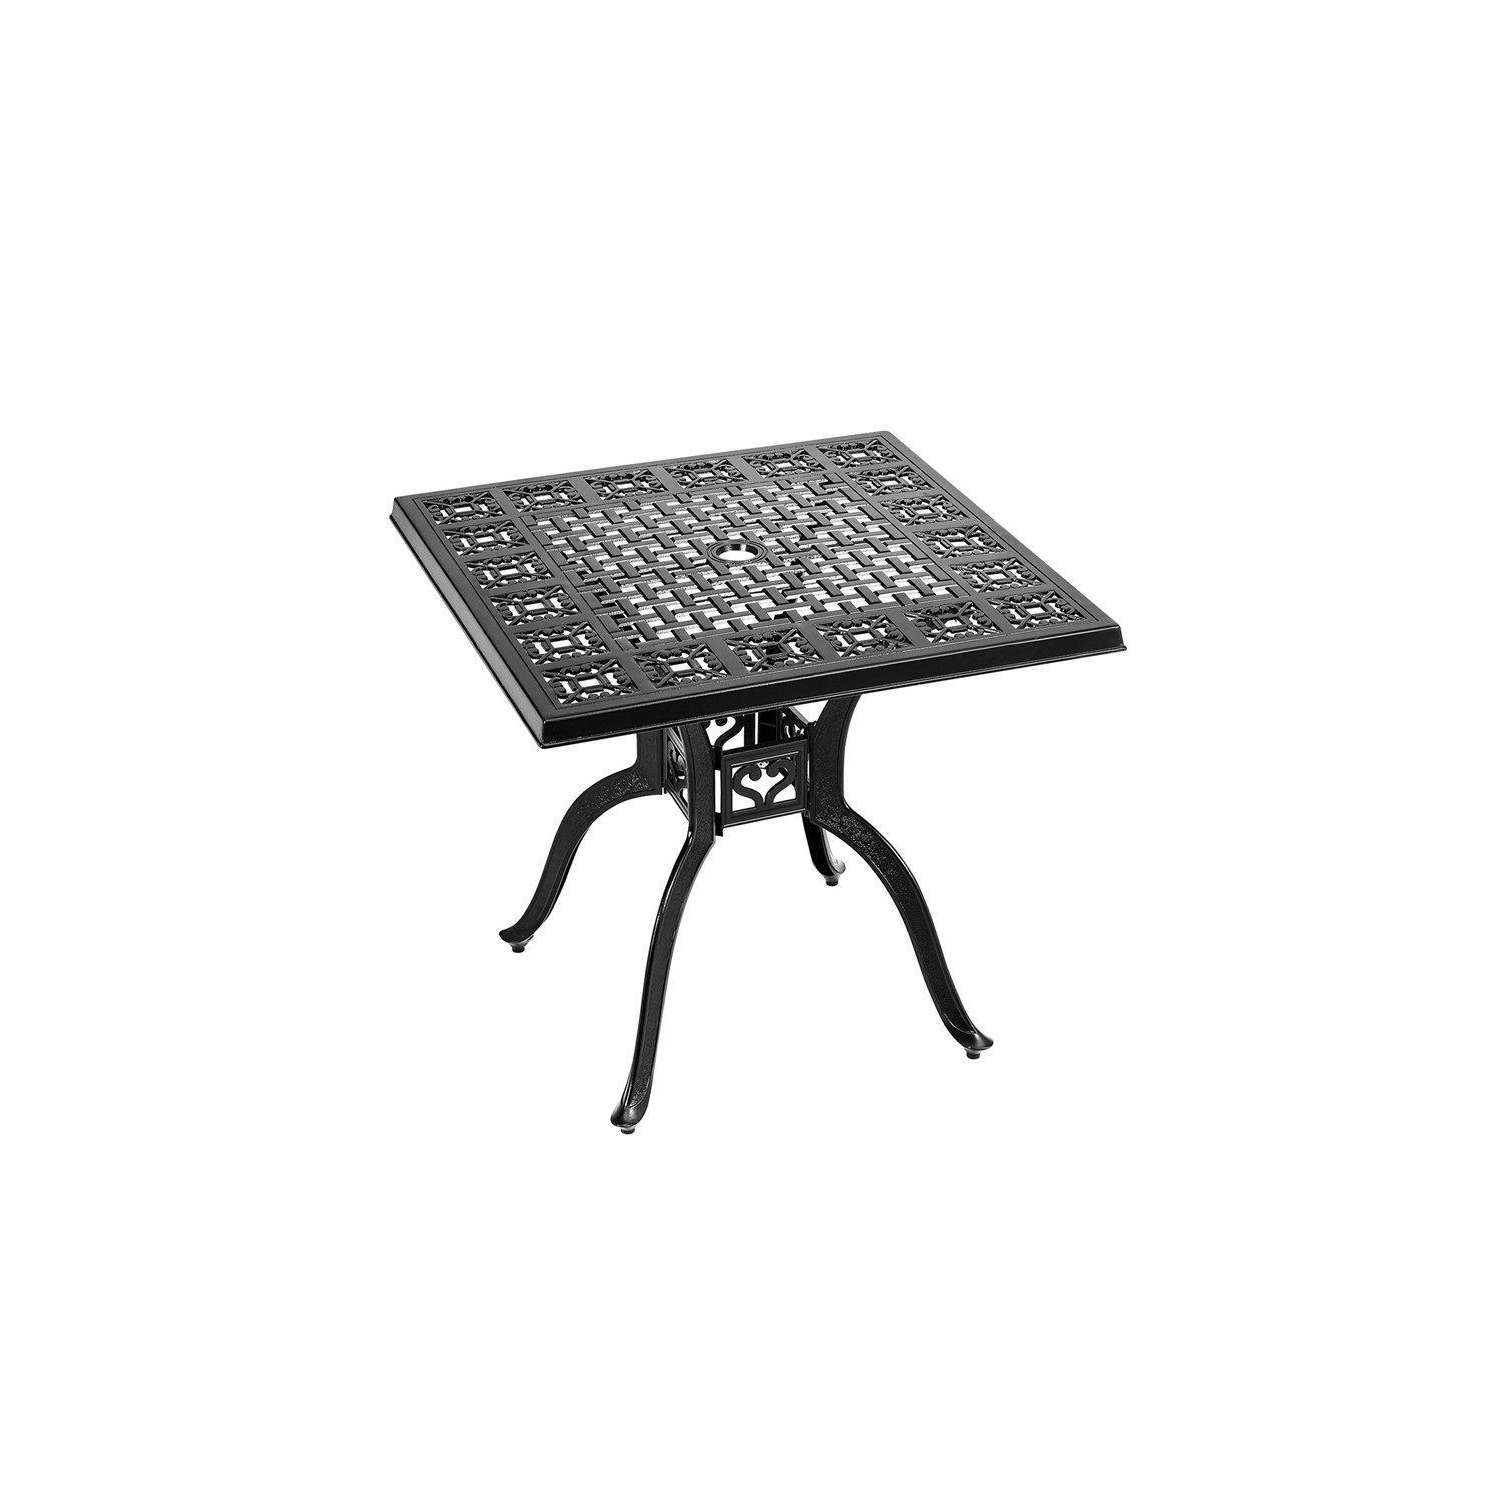 Square Aluminum Outdoor Garden Dining Table - image 1